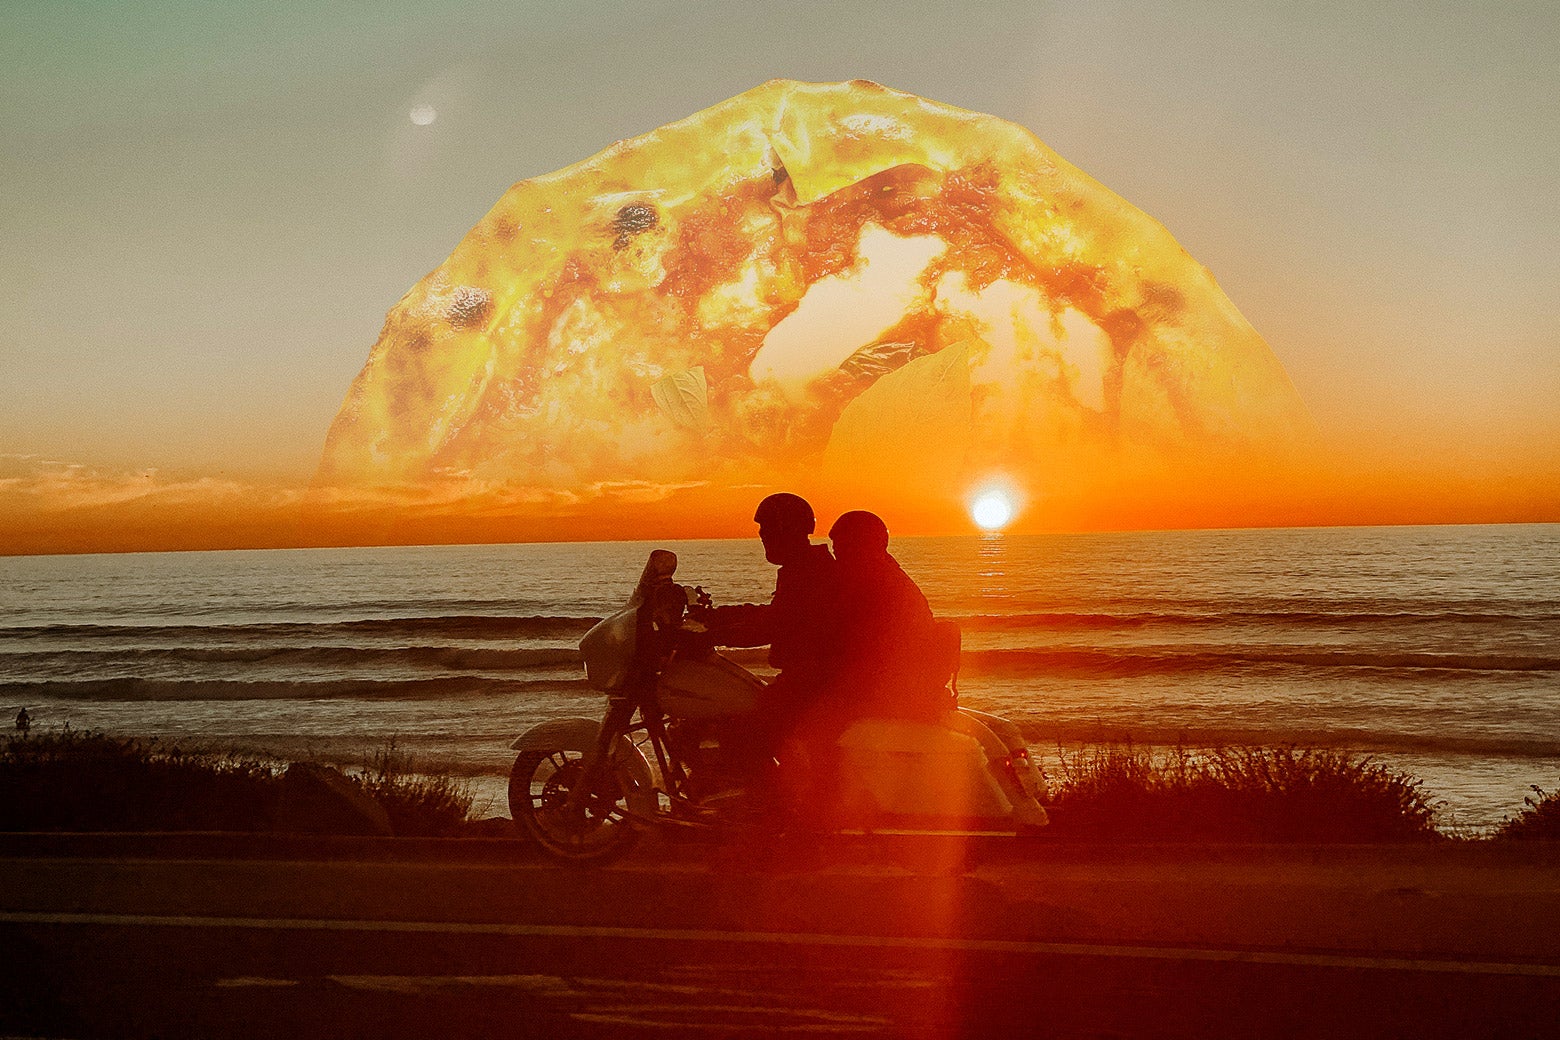 Two people ride a moped along the sea with a pizza sunset behind them.